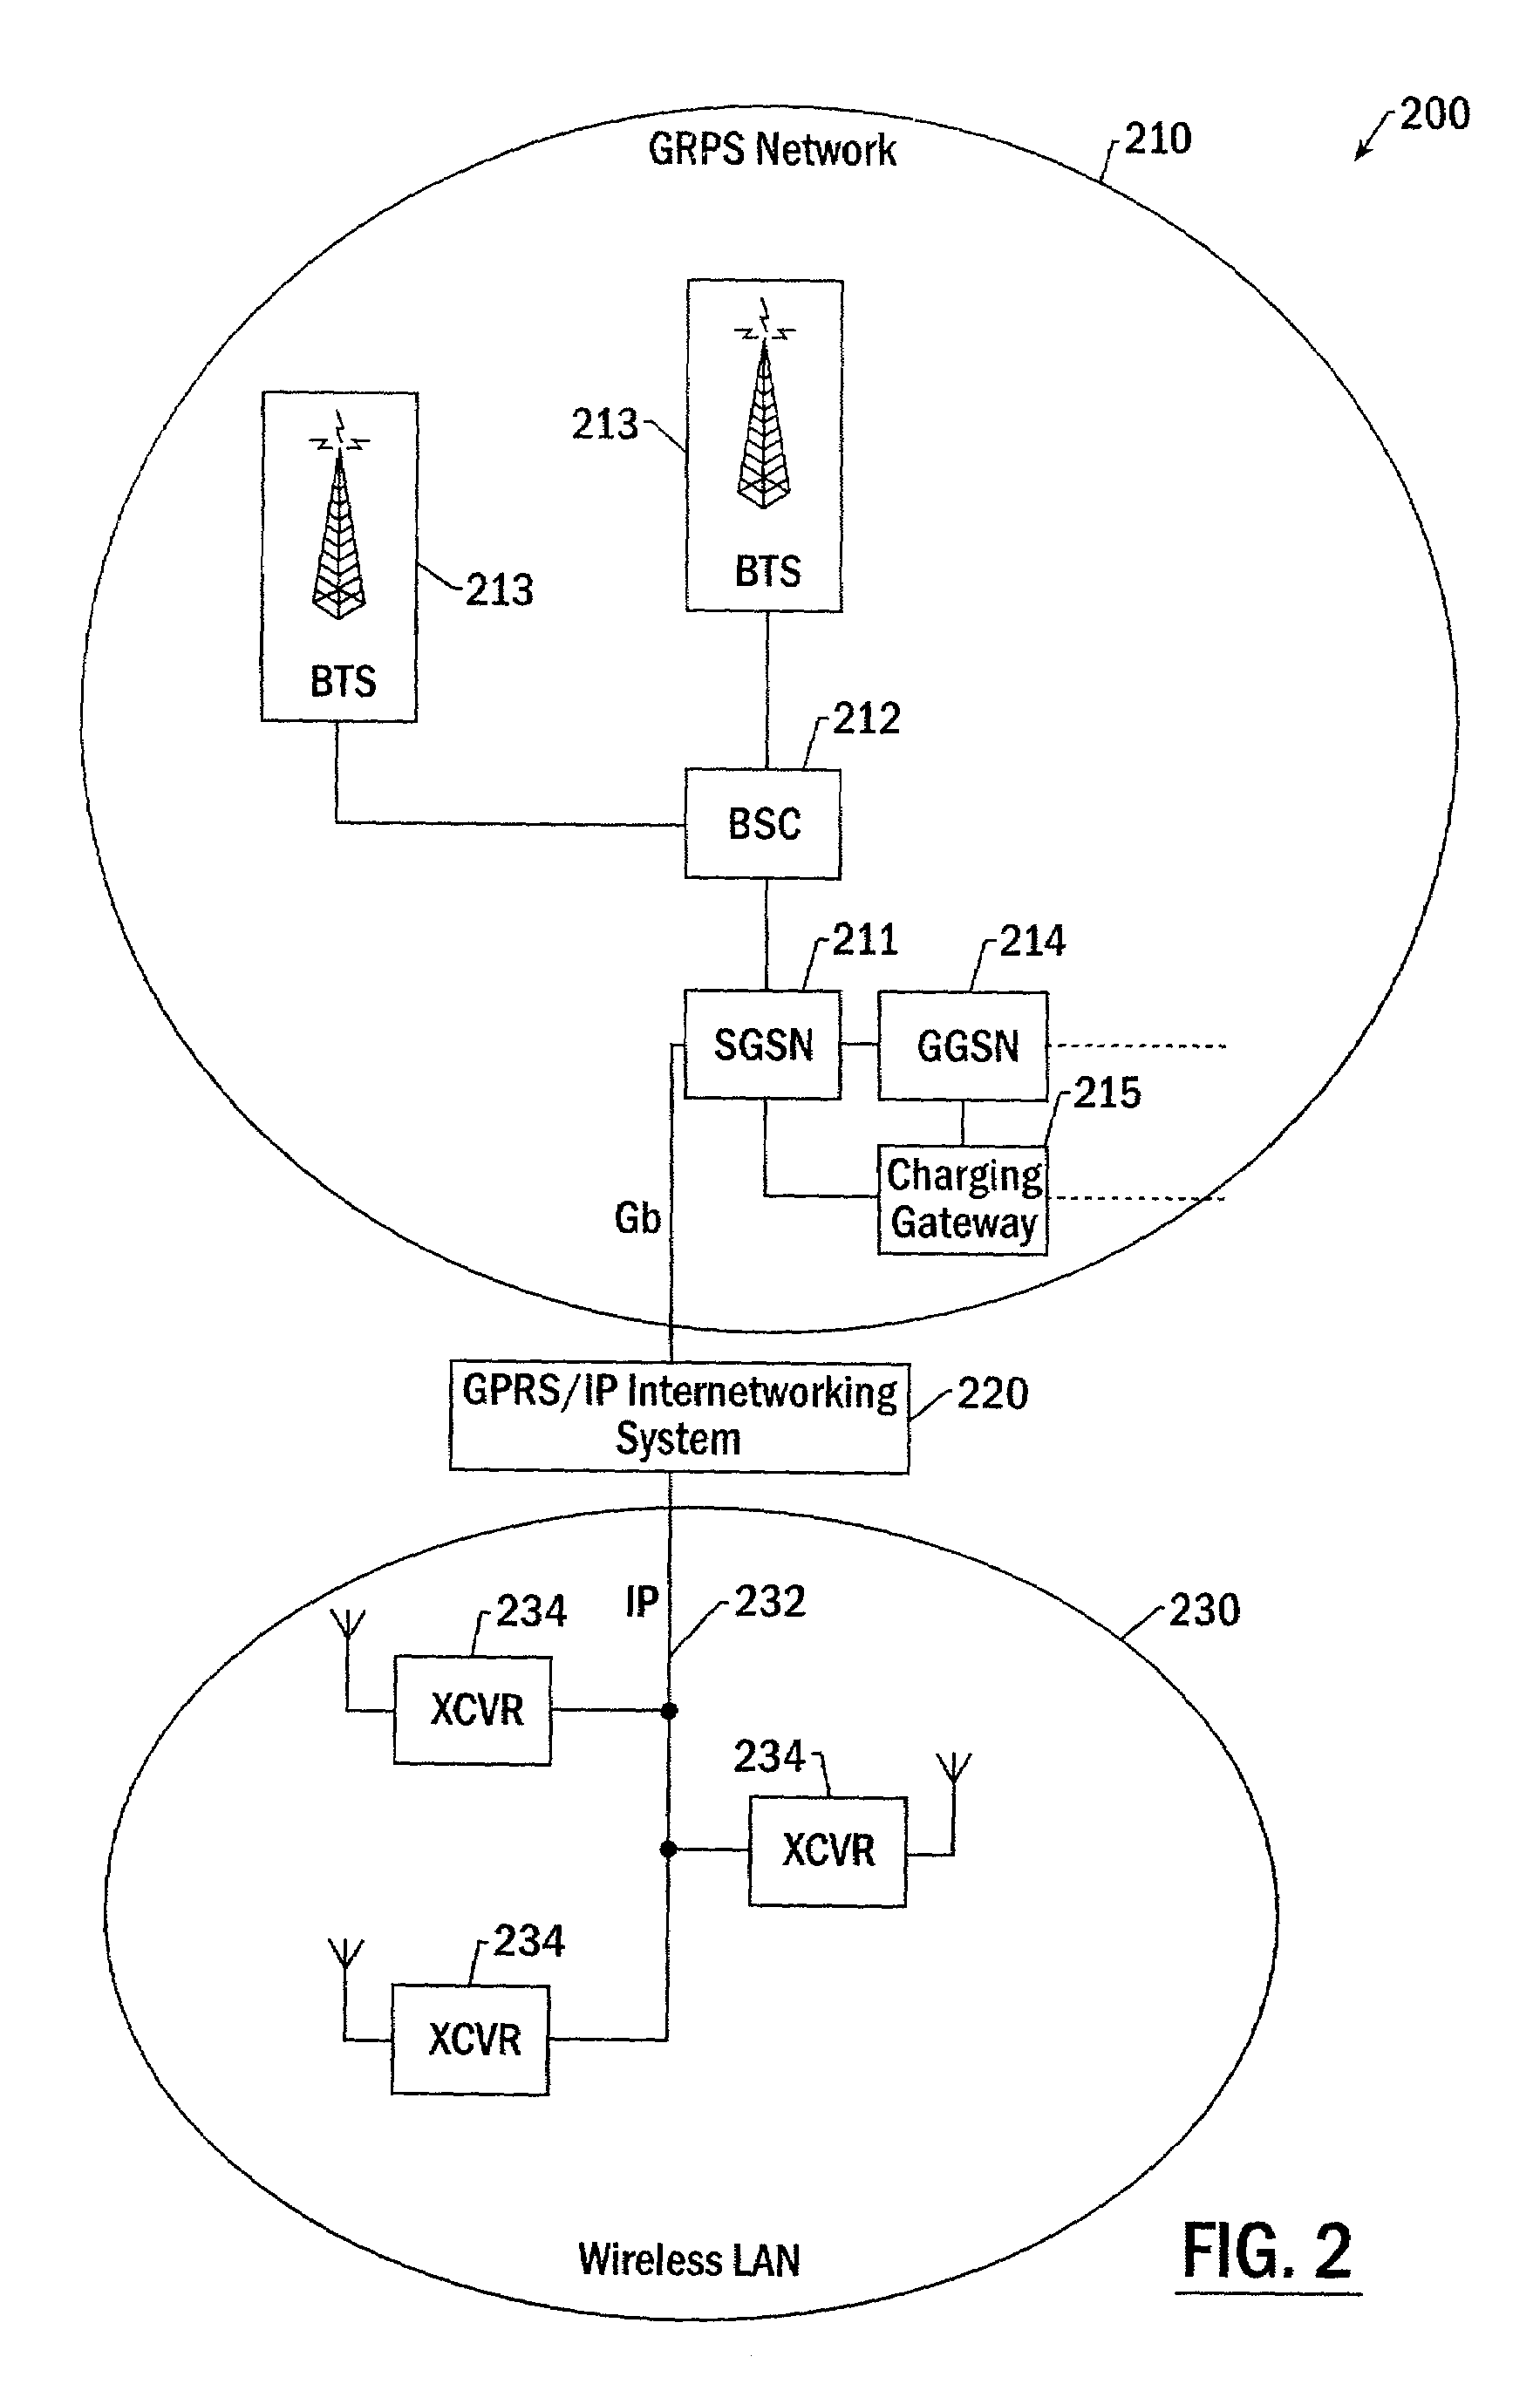 Mobile data communications apparatus, methods and computer program products implementing cellular wireless data communications via a wireless local area network